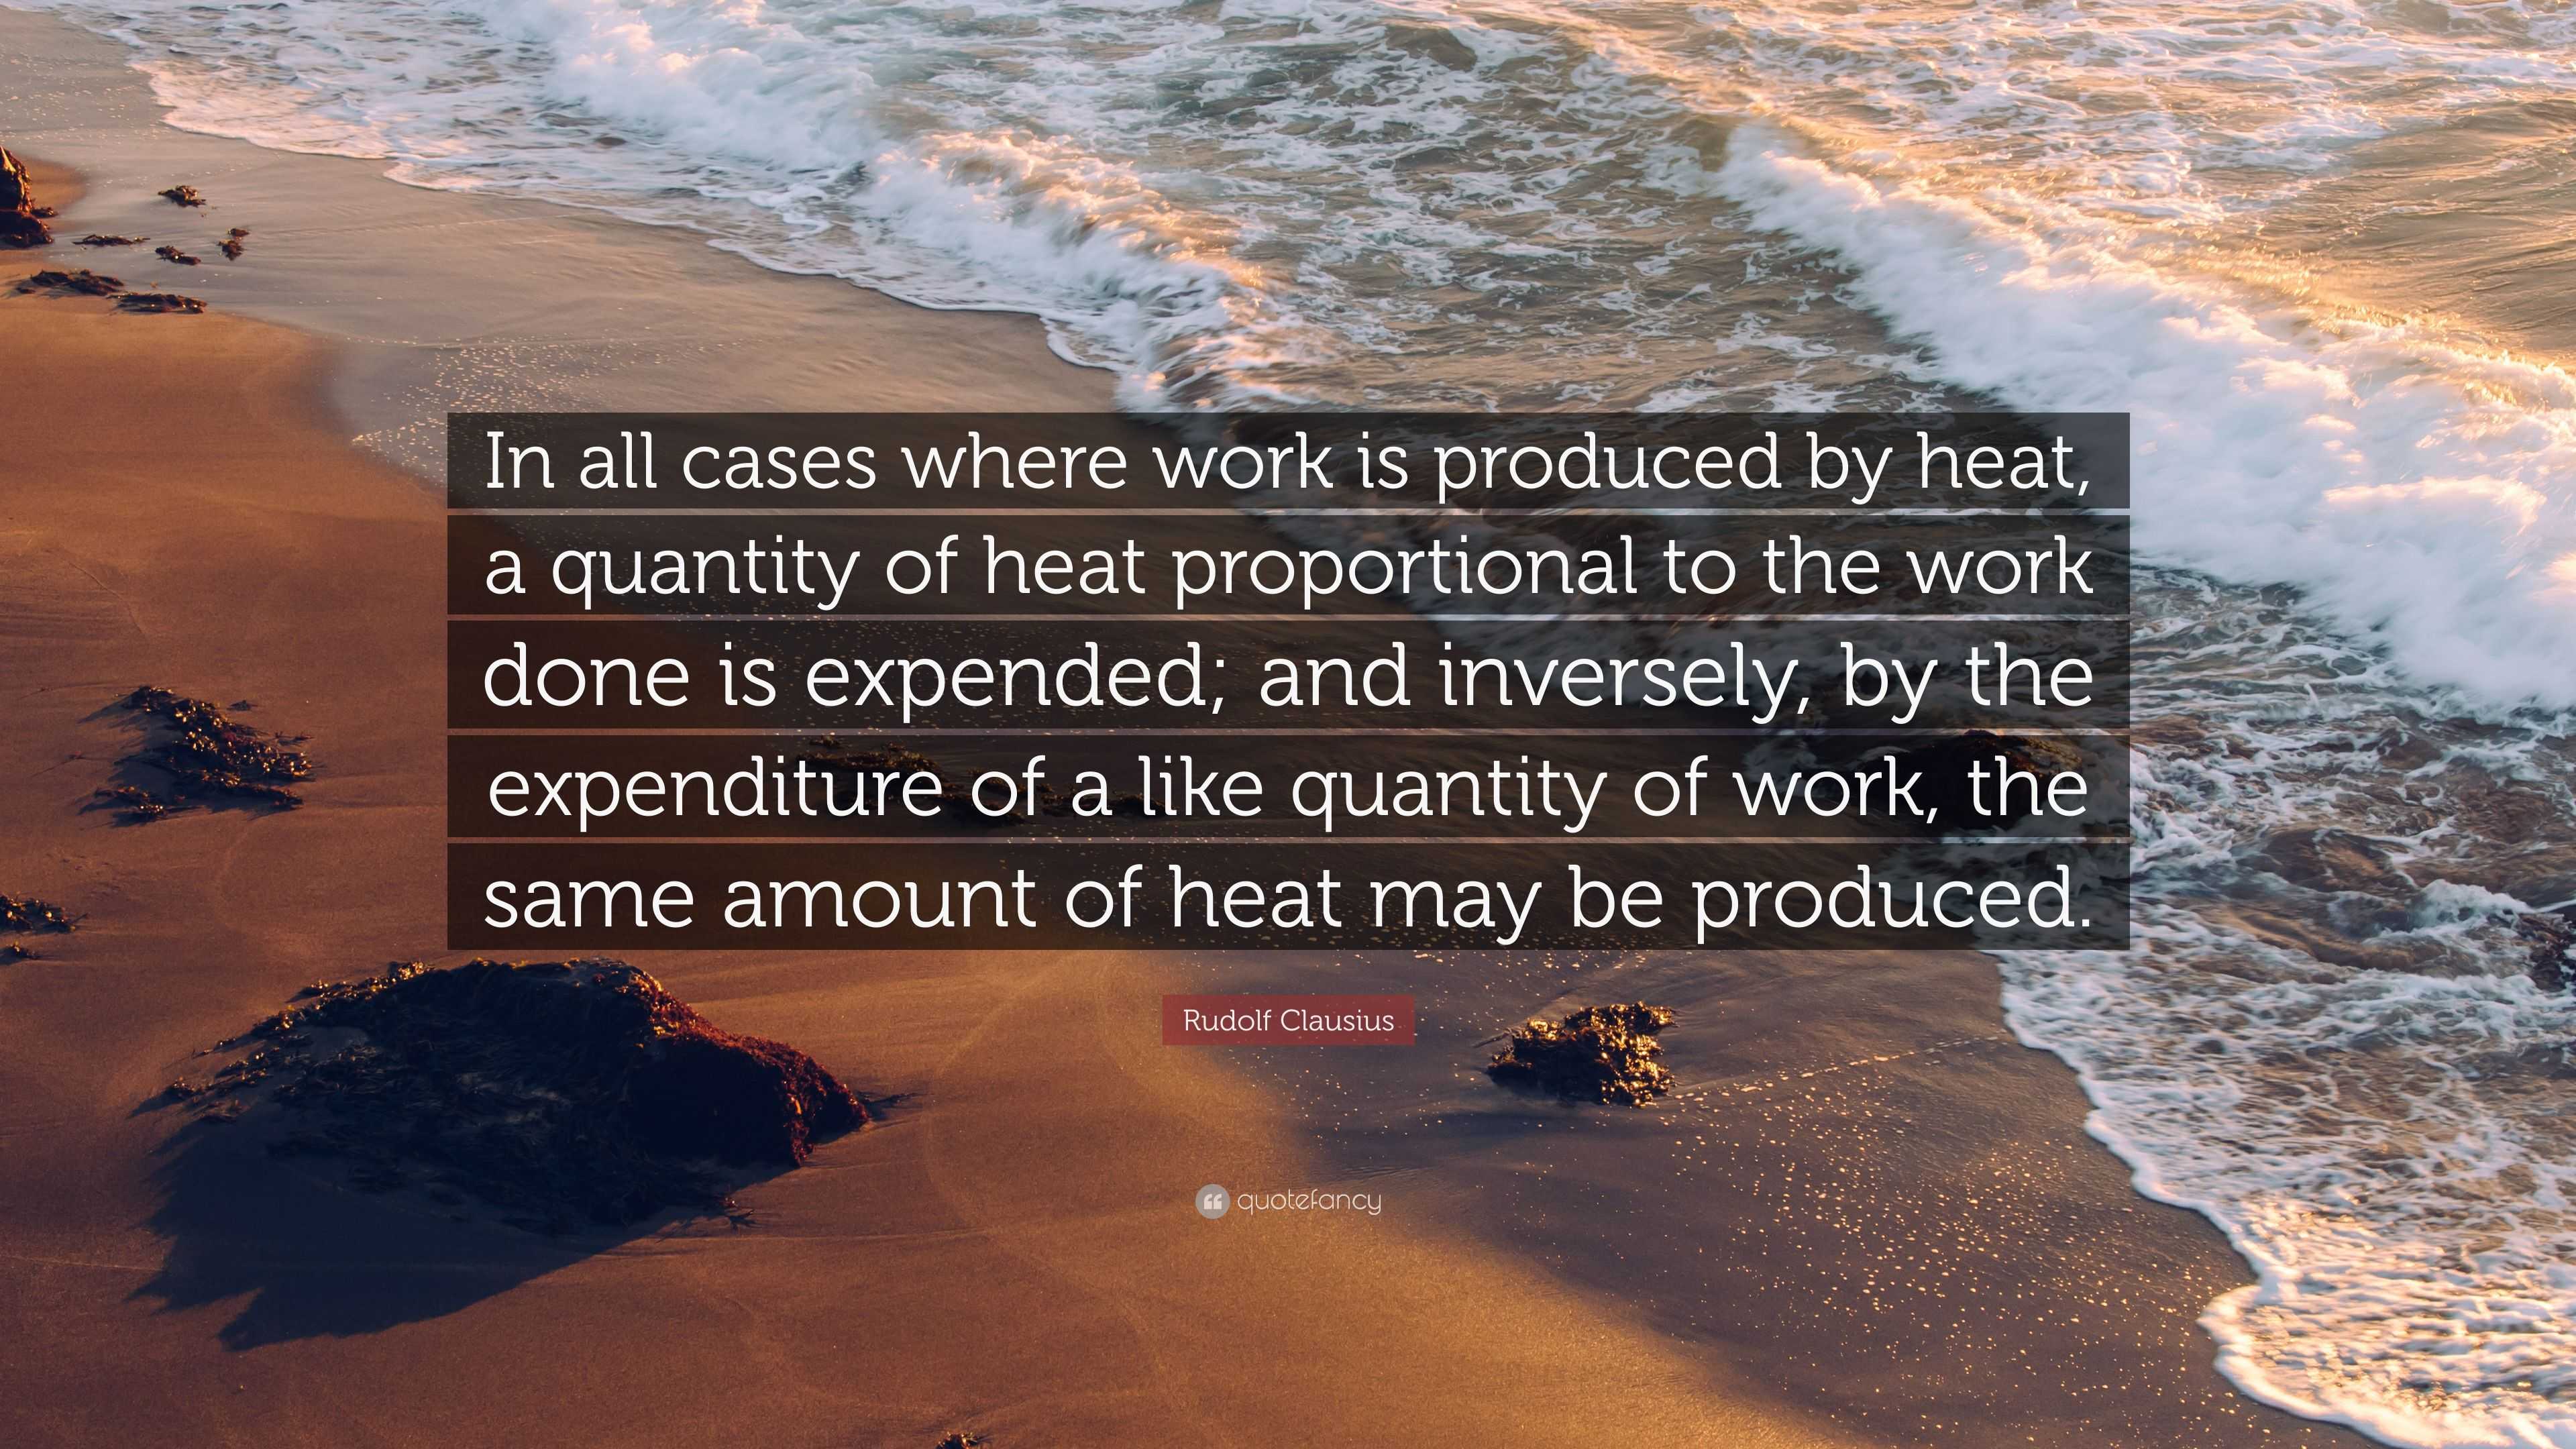 Rudolf Clausius Quote: “In all cases where work is produced by heat, a ...